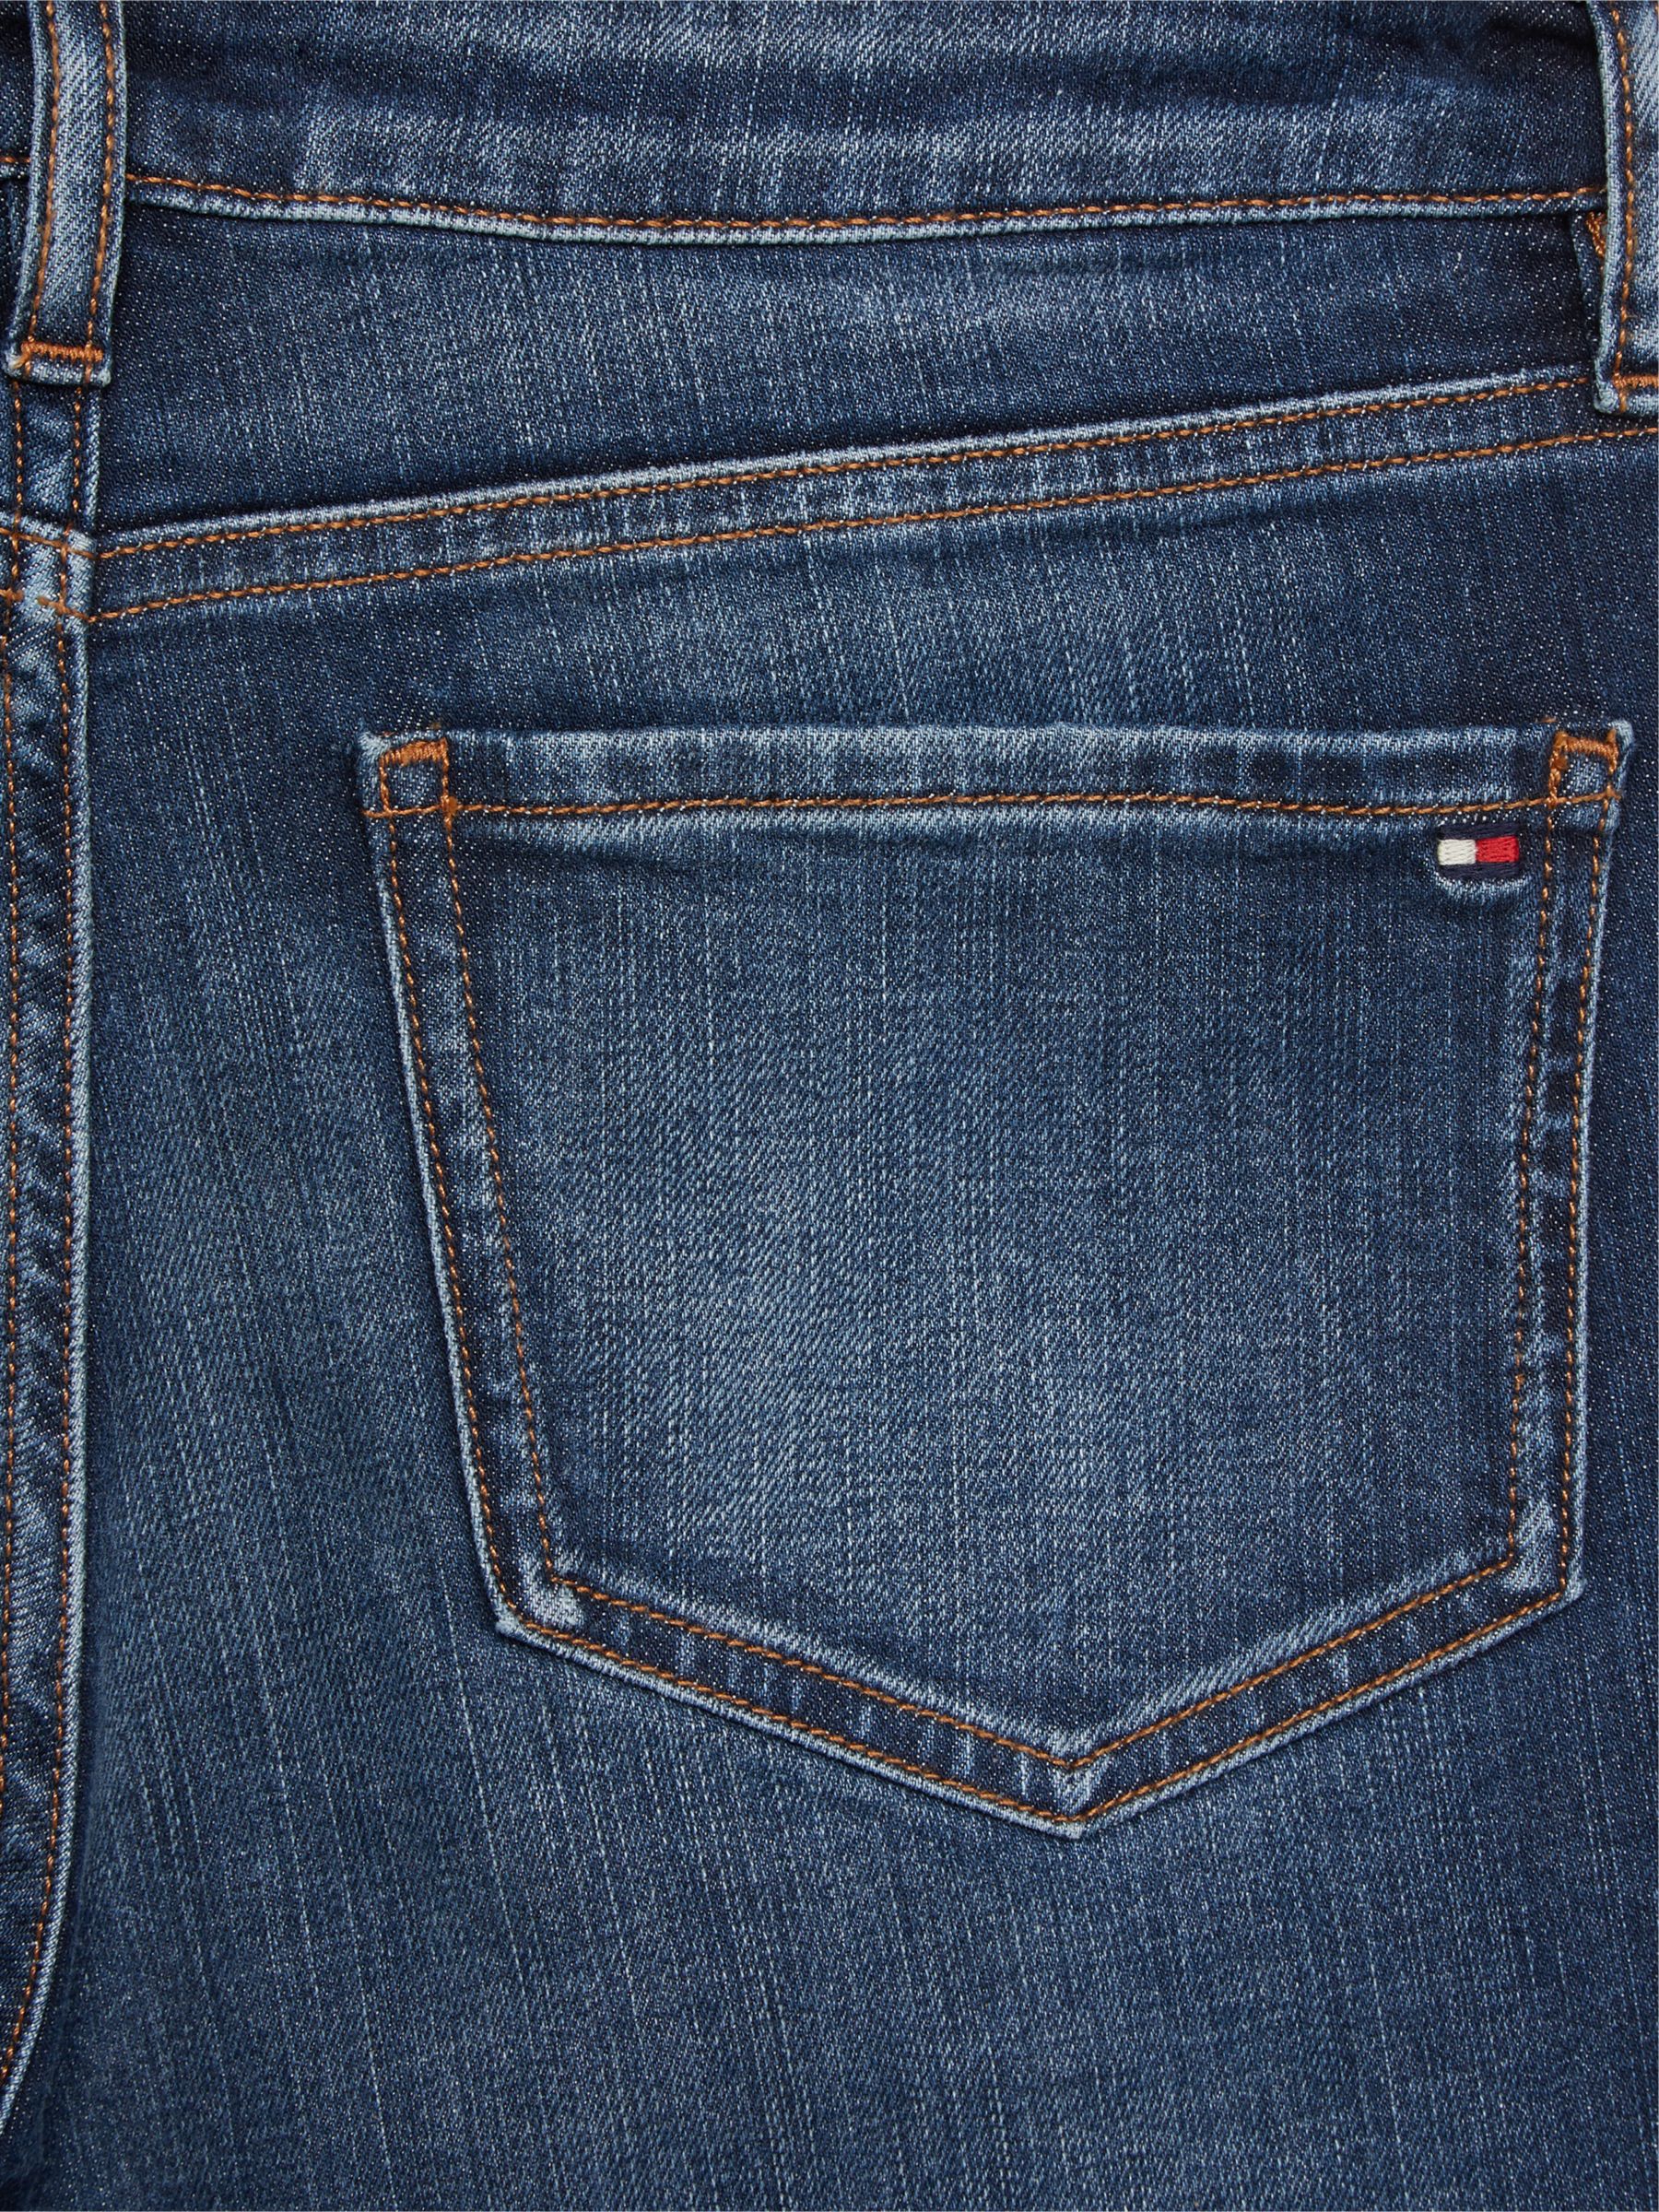 Tommy Hilfiger Straight Fit Jeans, Absolute Blue Wash, 28S